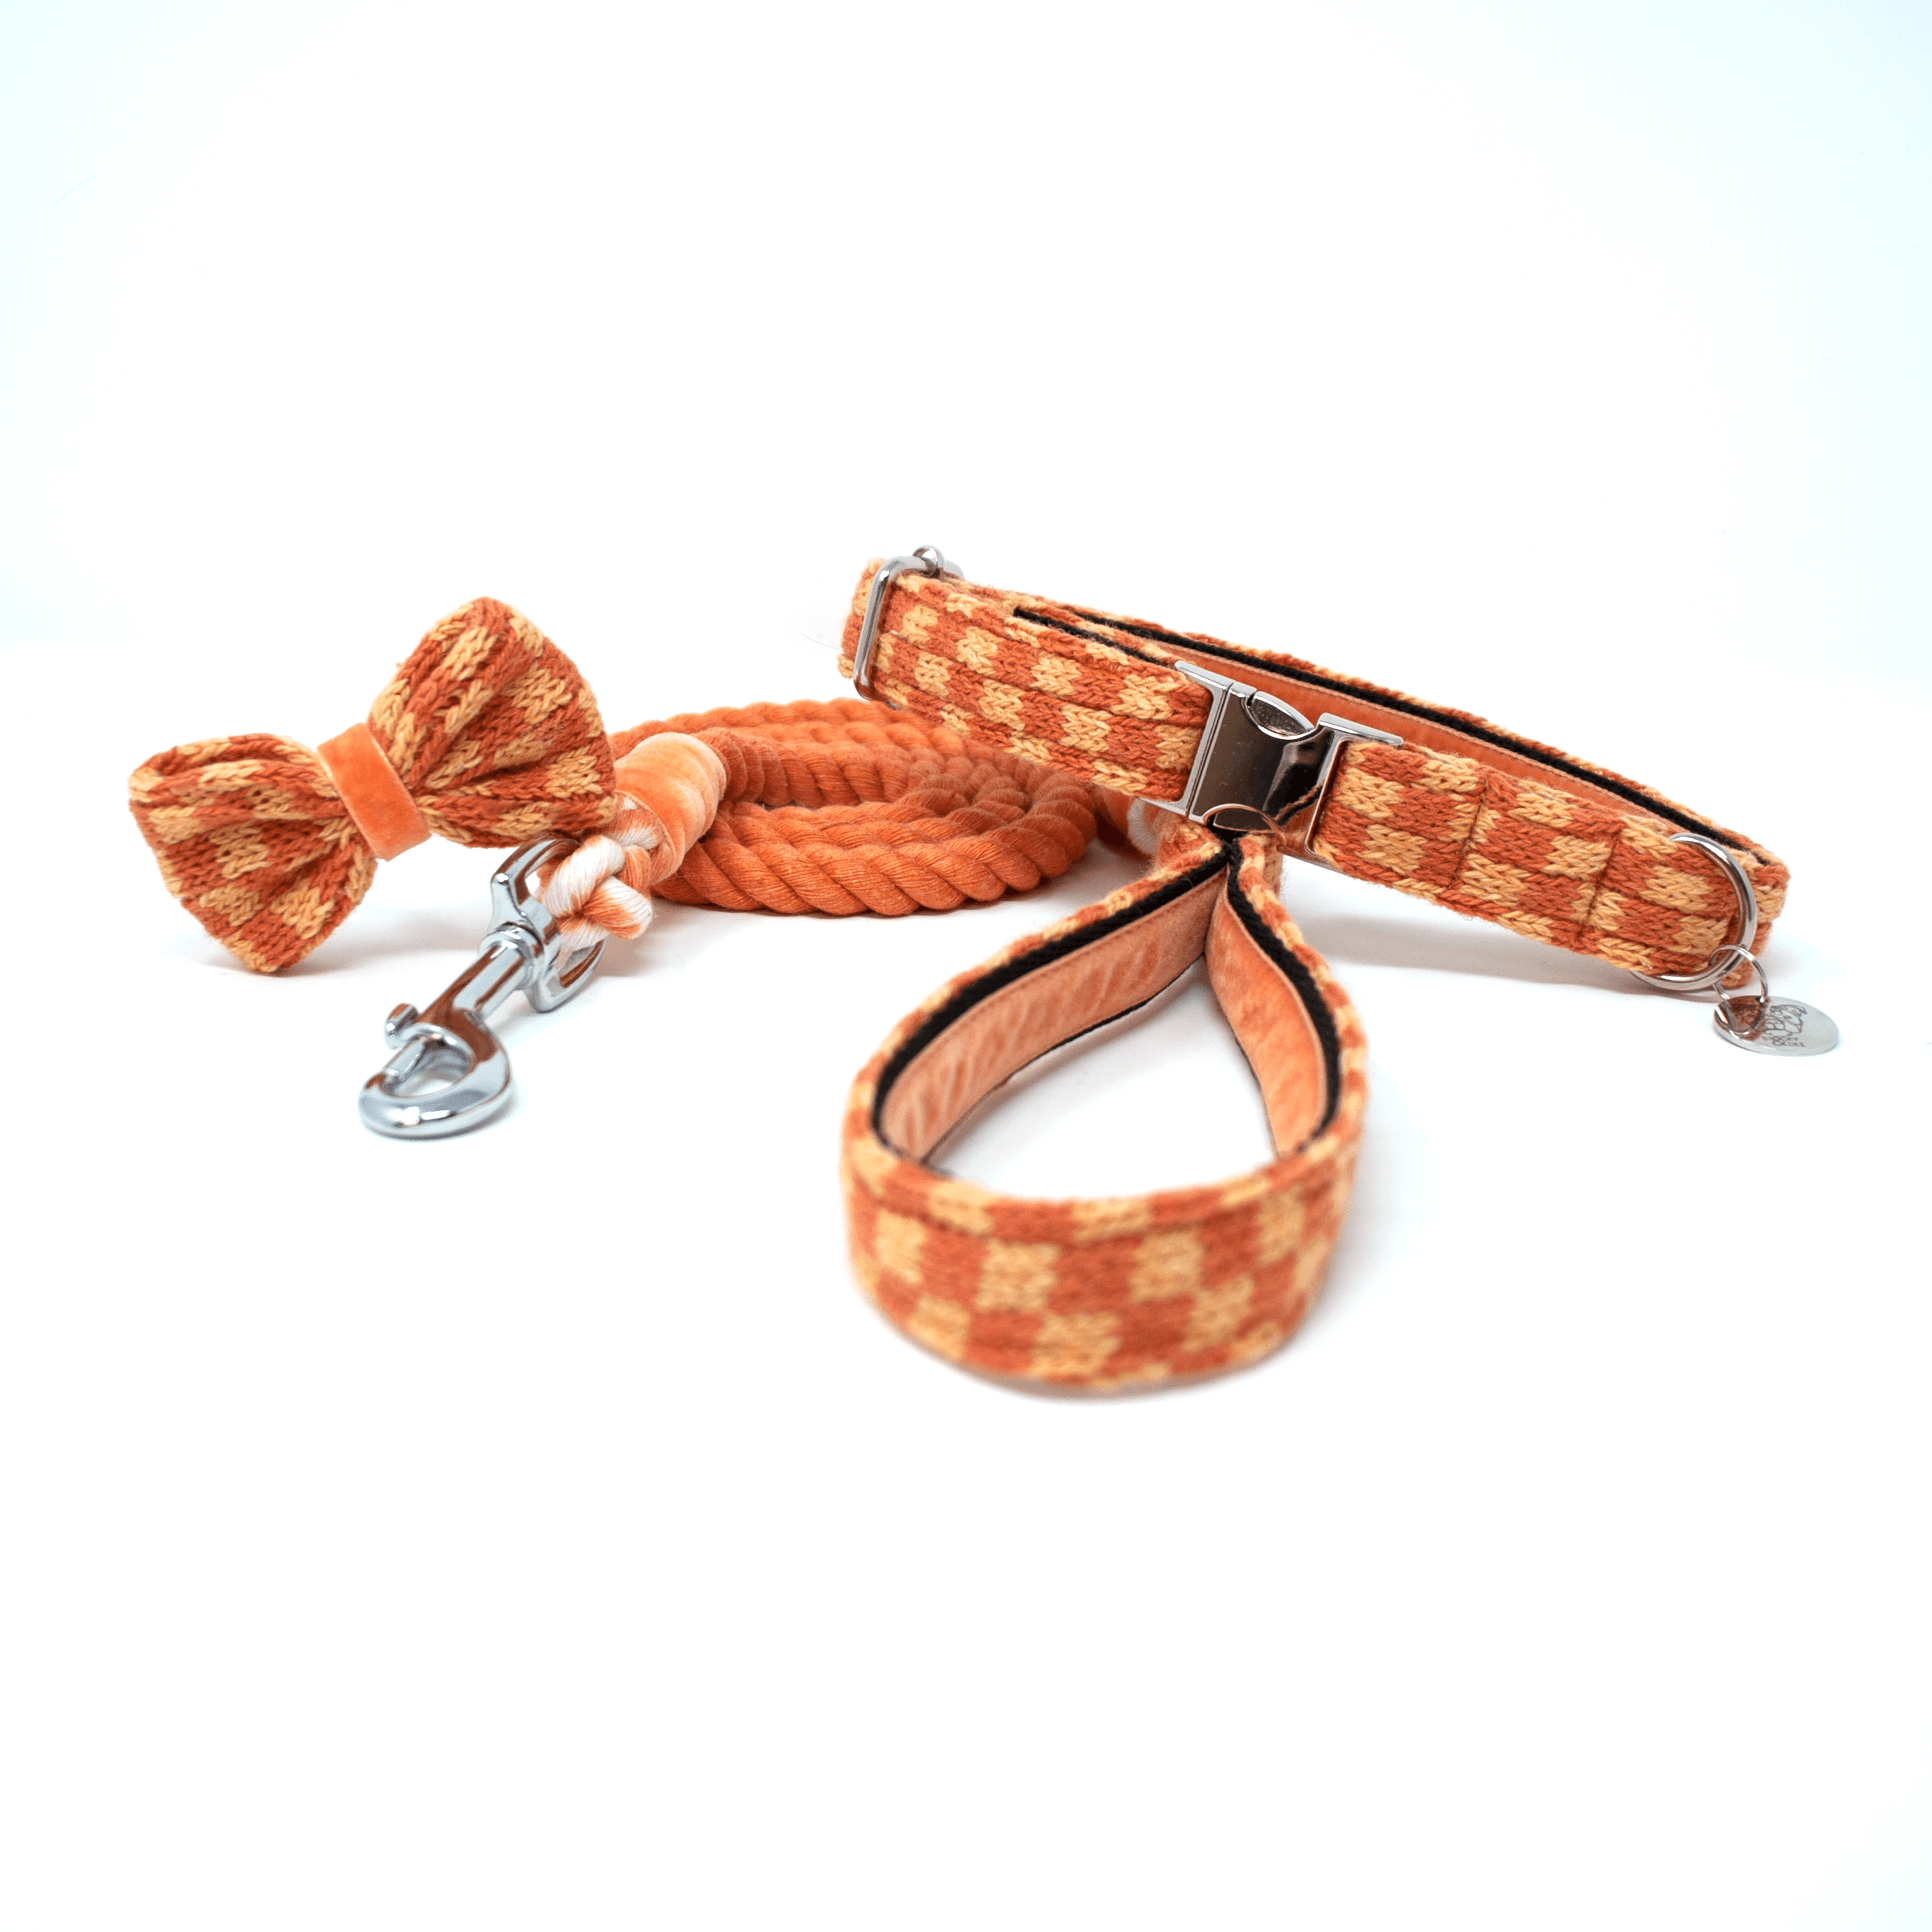 Melon - SS24 Collection - Luxury Dog Collar